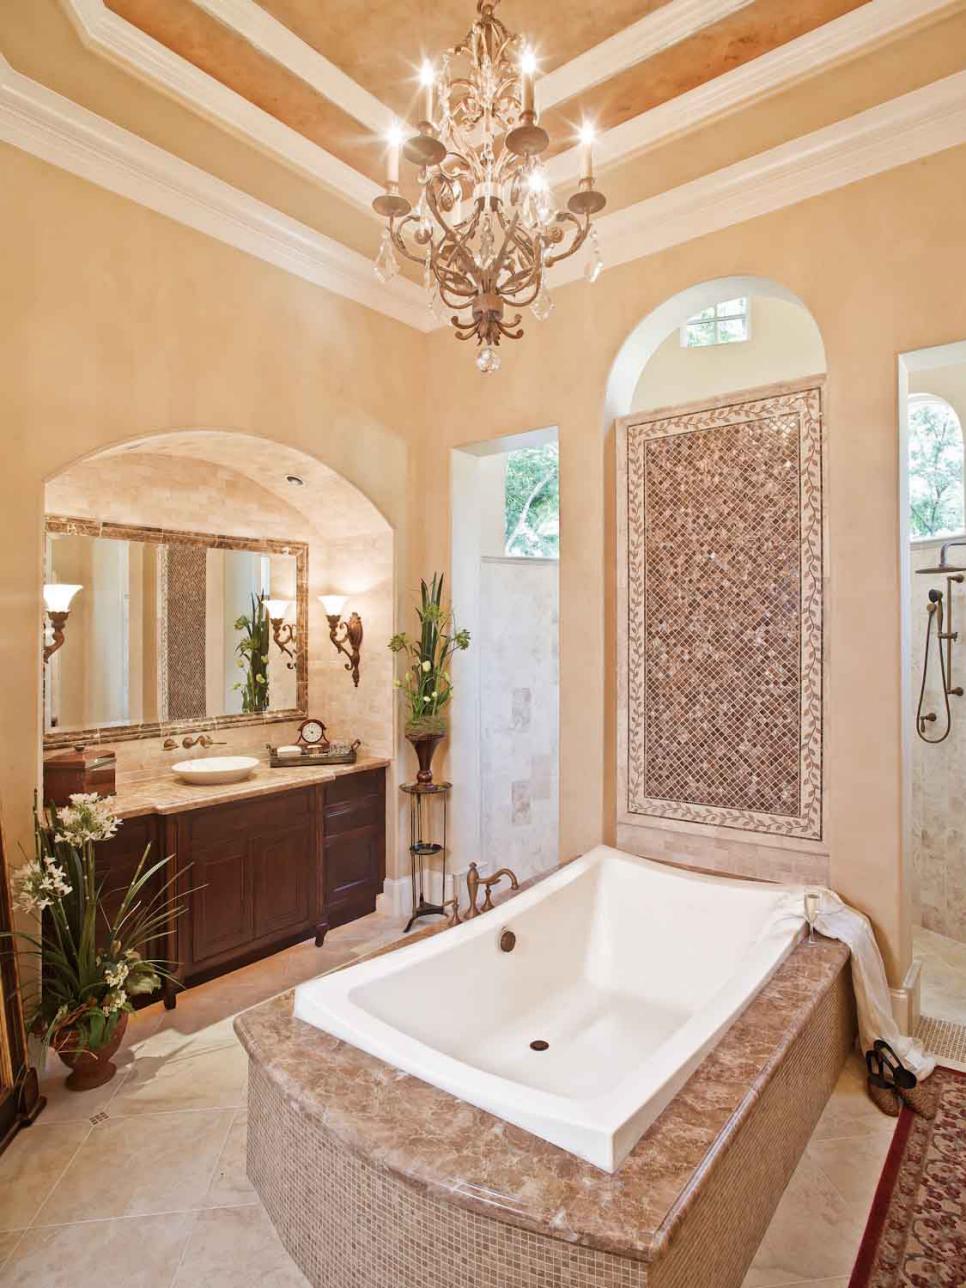 Pictures of Beautiful Luxury Bathtubs - Ideas ...